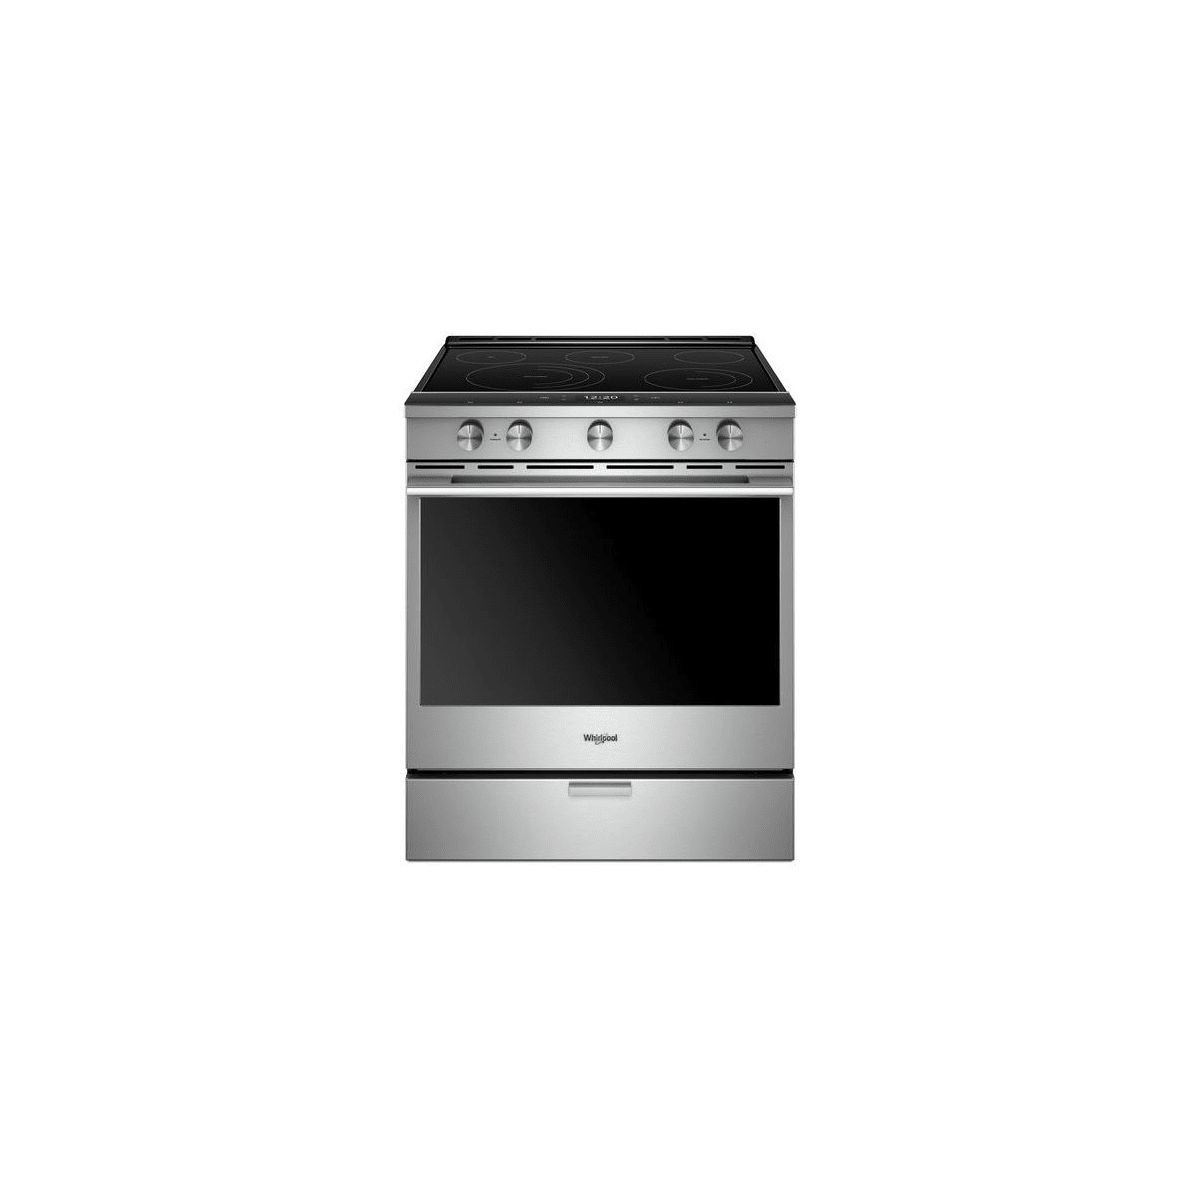 30 Inch Wide 4.8 Cu. Ft. Capacity Slide In Electric Range with Nest Learning Thermostat Integrati... | Build.com, Inc.